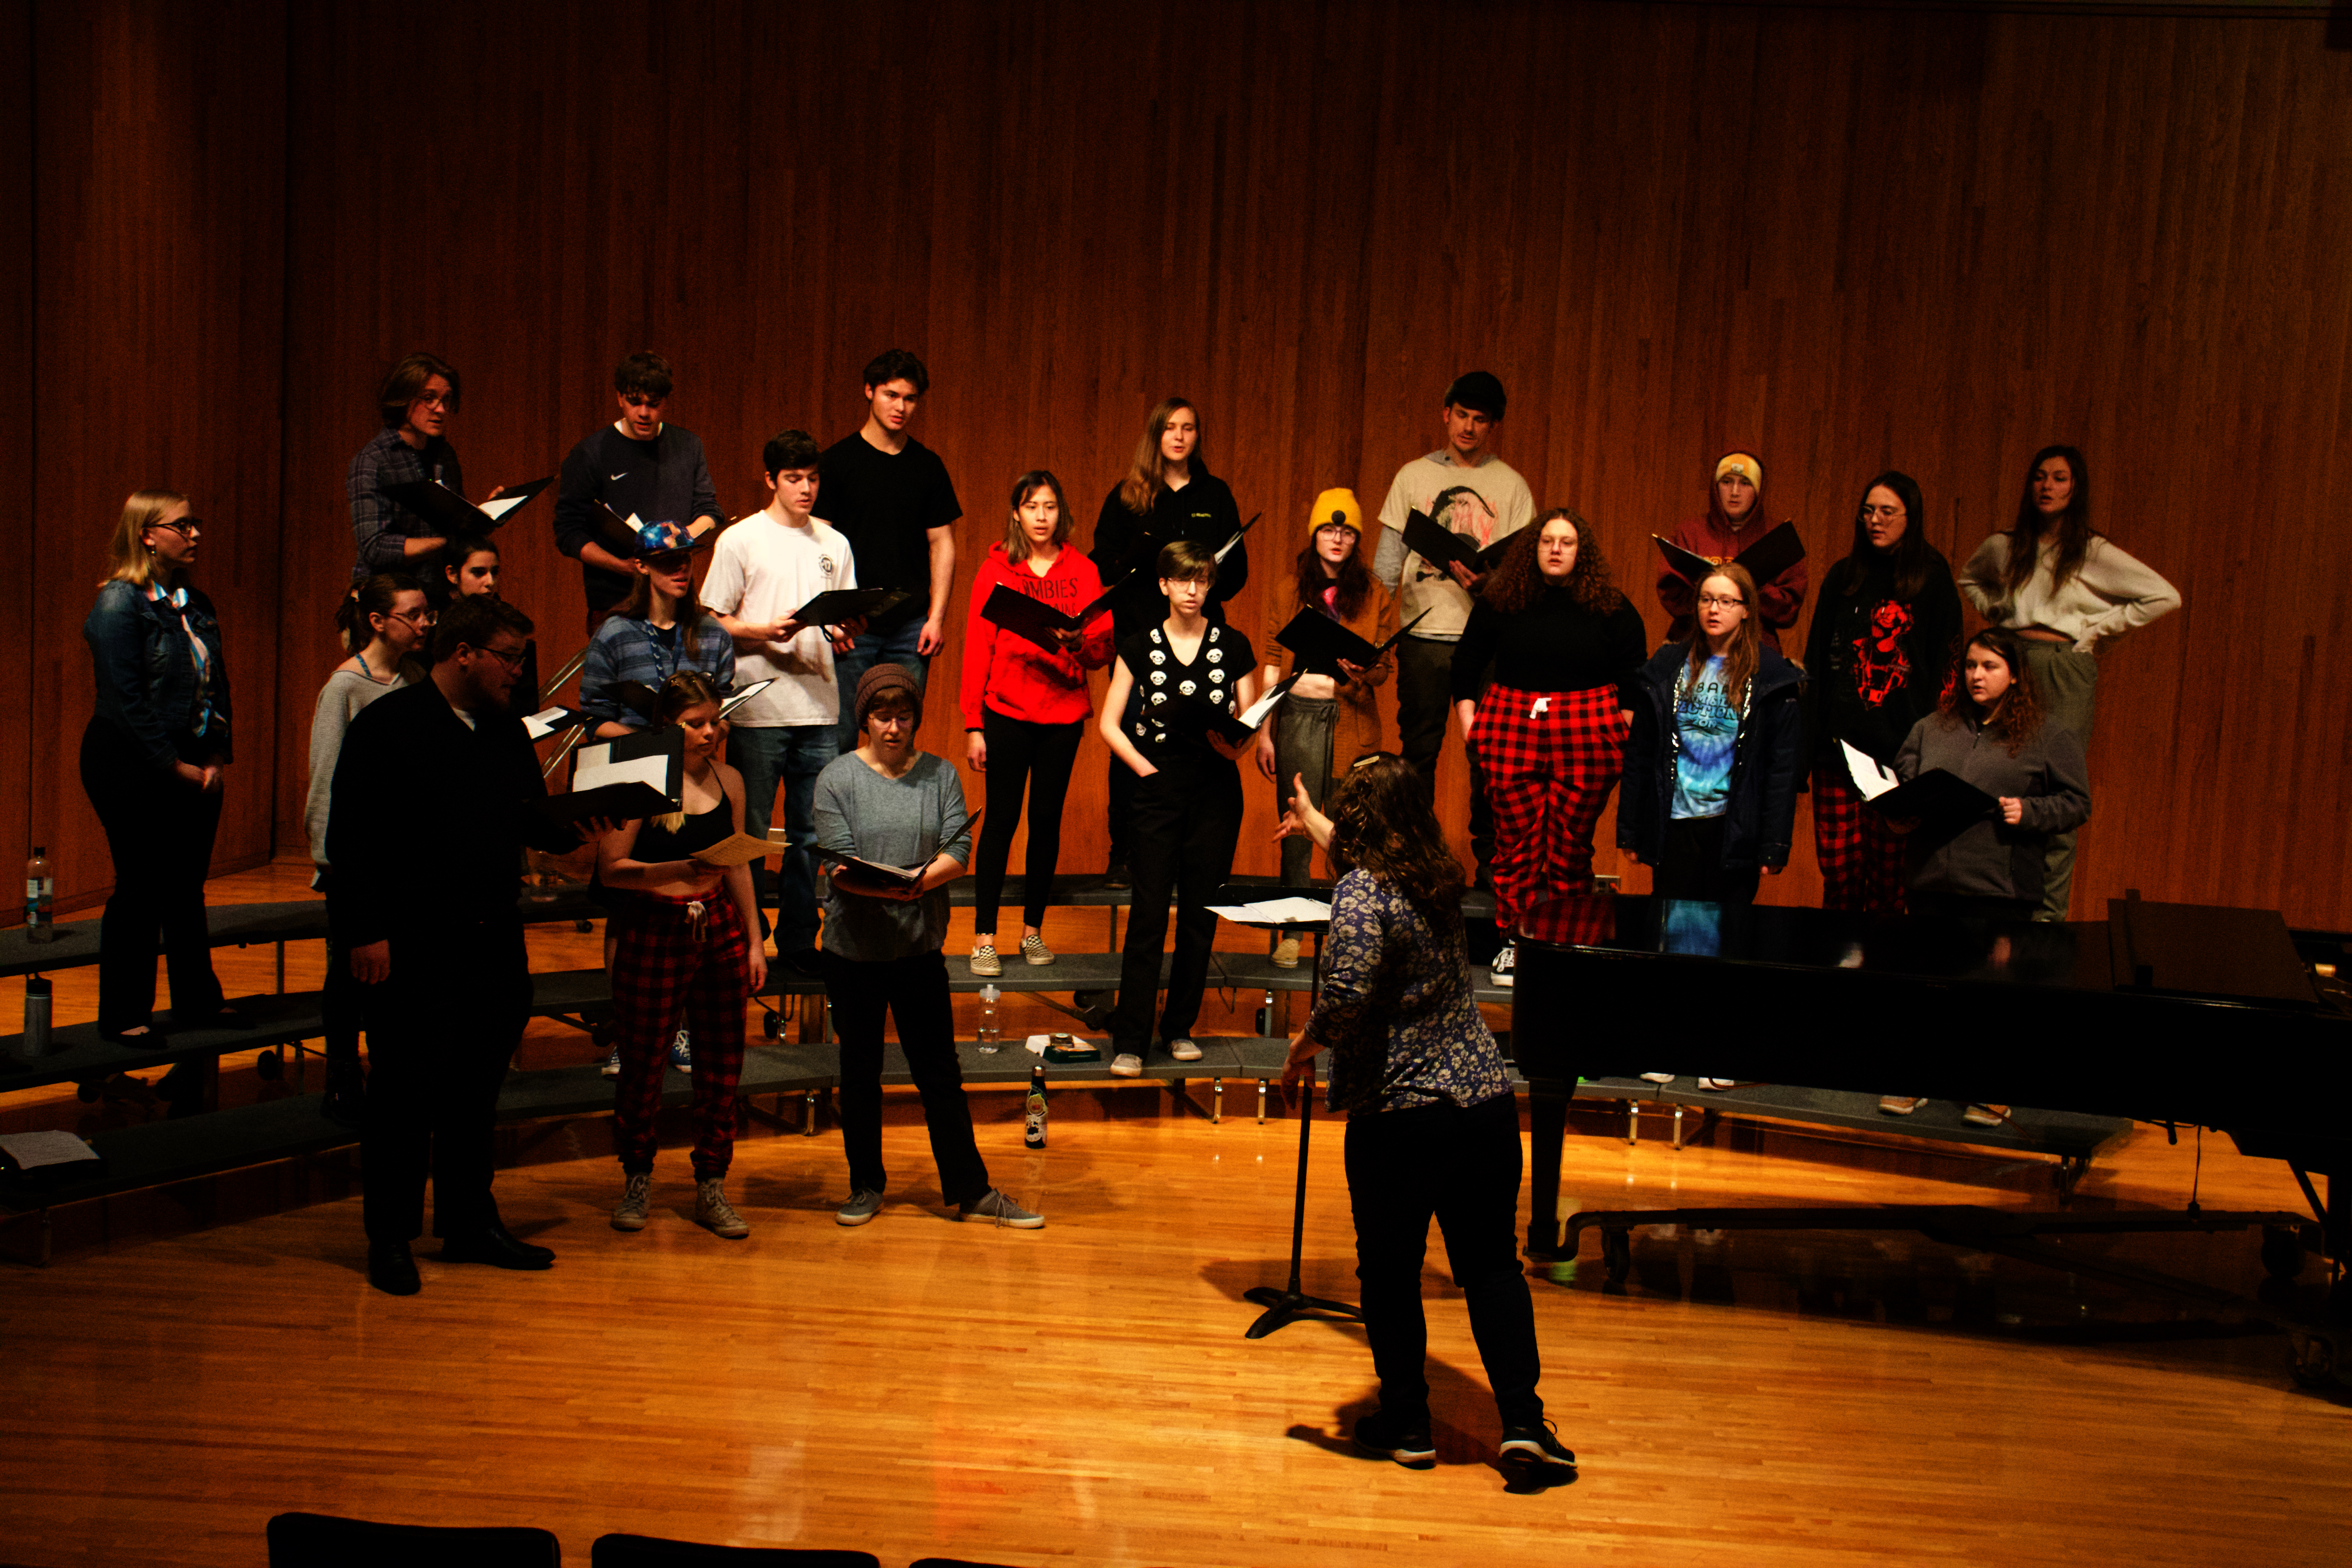 A mixed choir on risers singing